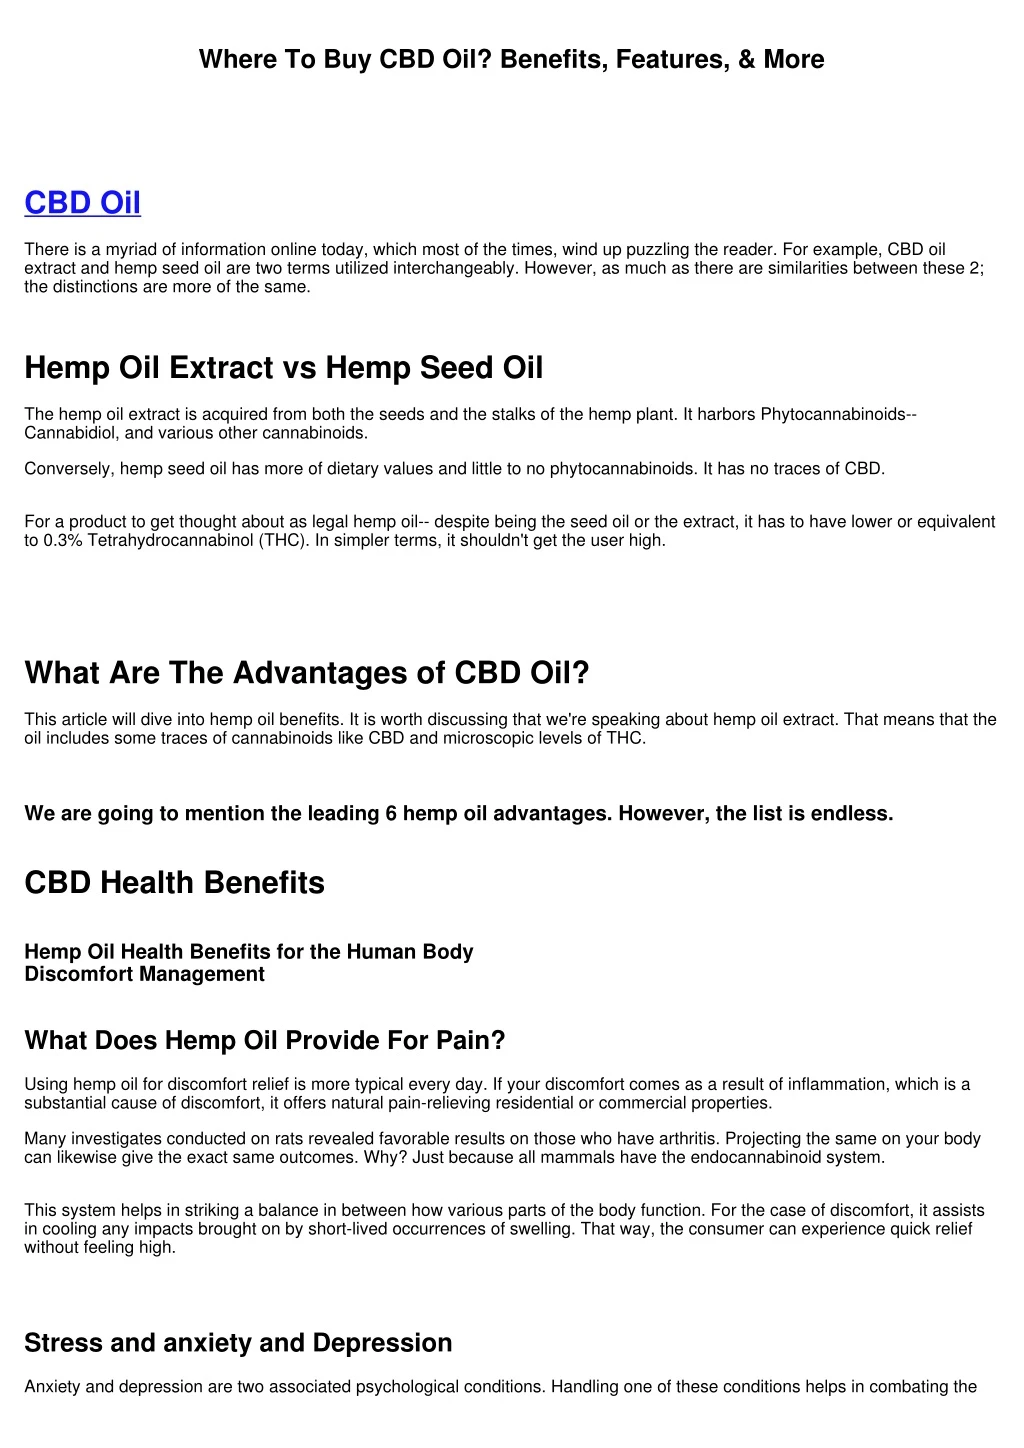 where to buy cbd oil benefits features more